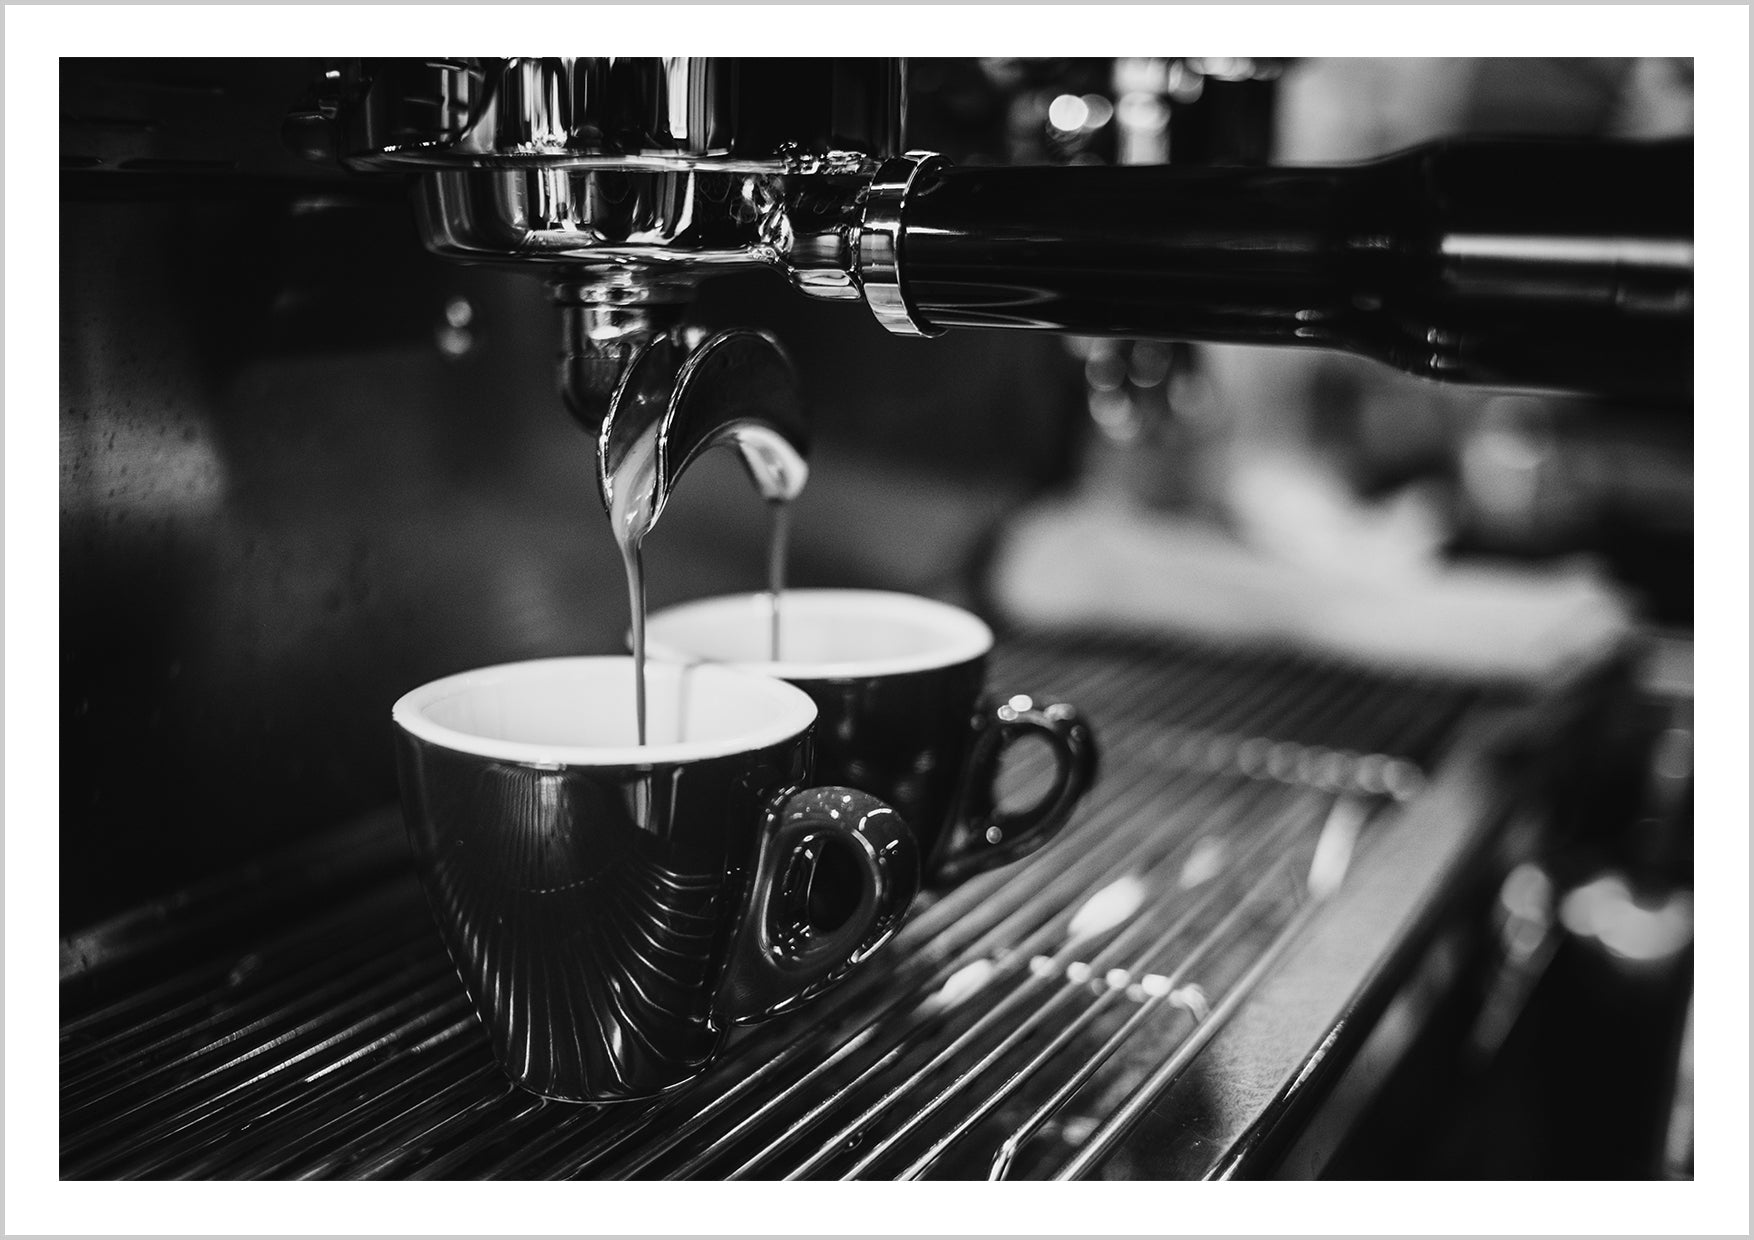 Close-up photograph in black and white of coffee dripping out of an espresso machine. This print is perfect for the coffee lover who wants to add a high-end look to their kitchen space.